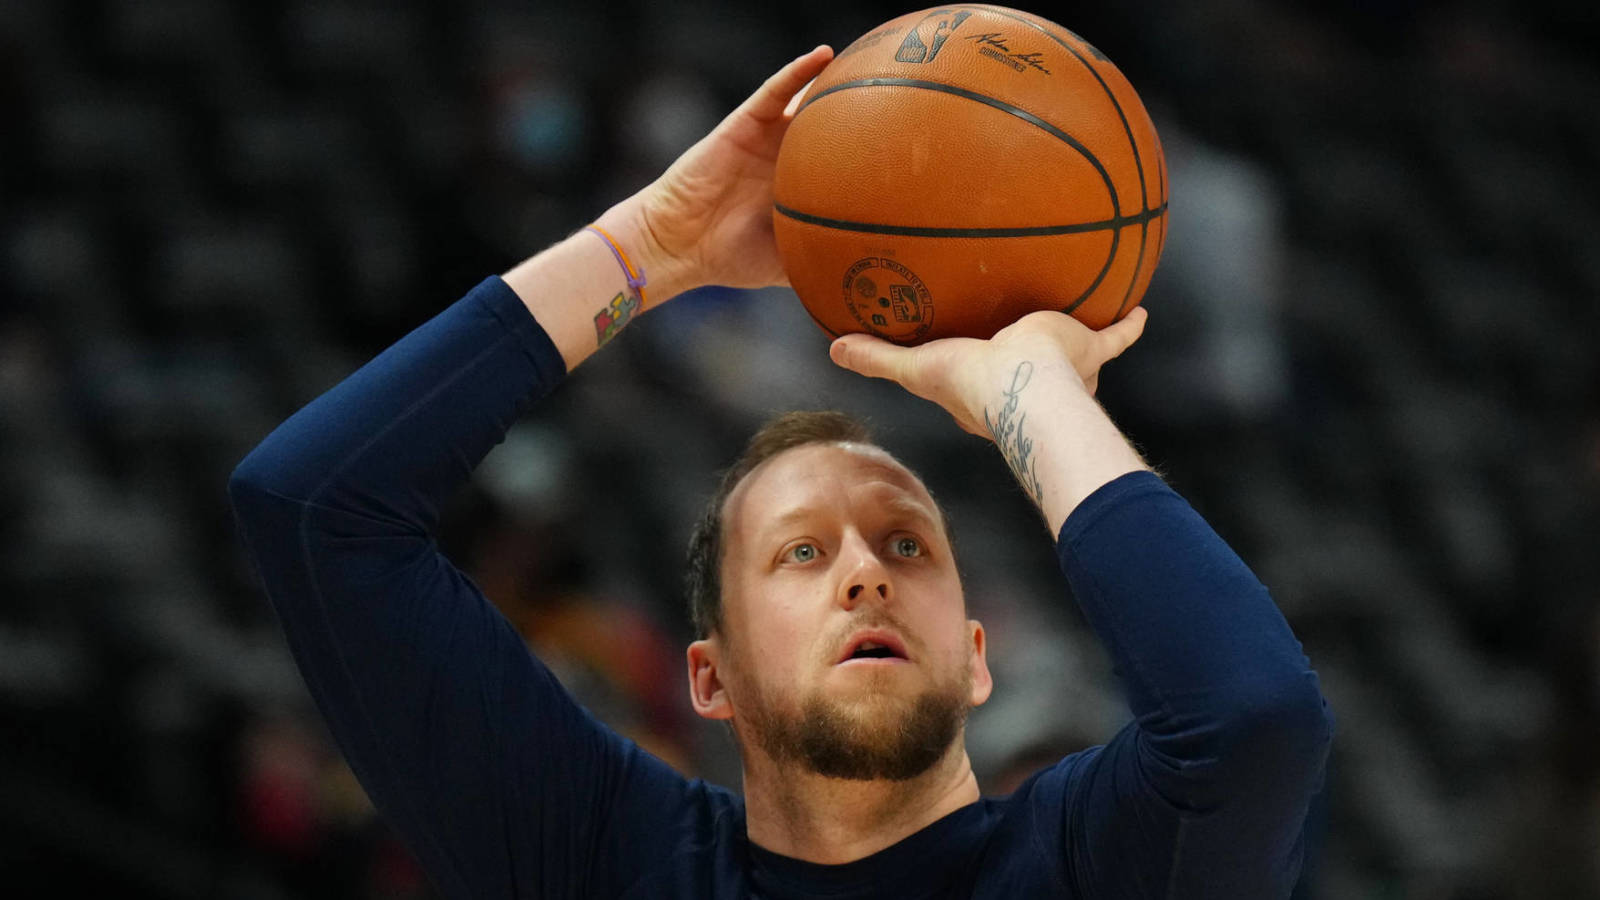 Joe Ingles suffers potentially 'significant' knee injury; MRI set for Monday